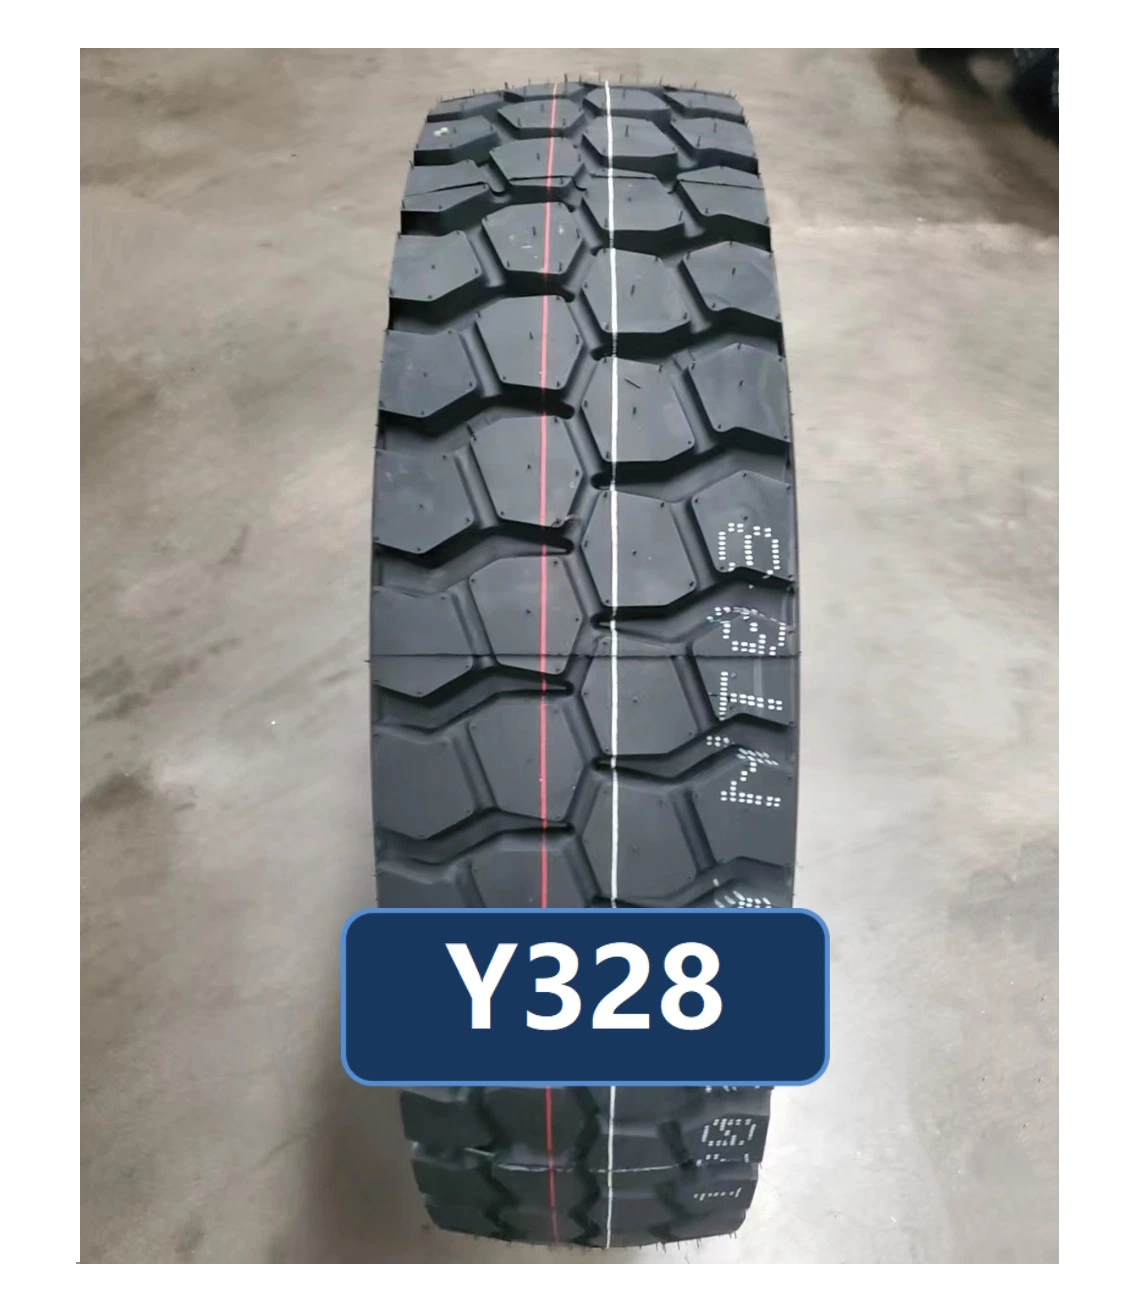 Used Semi Truck Tires Wholesale/Supplier Discount Tire Direct Tires Wheels Tire Repair & Tire Service Commercial Truck Tires Online